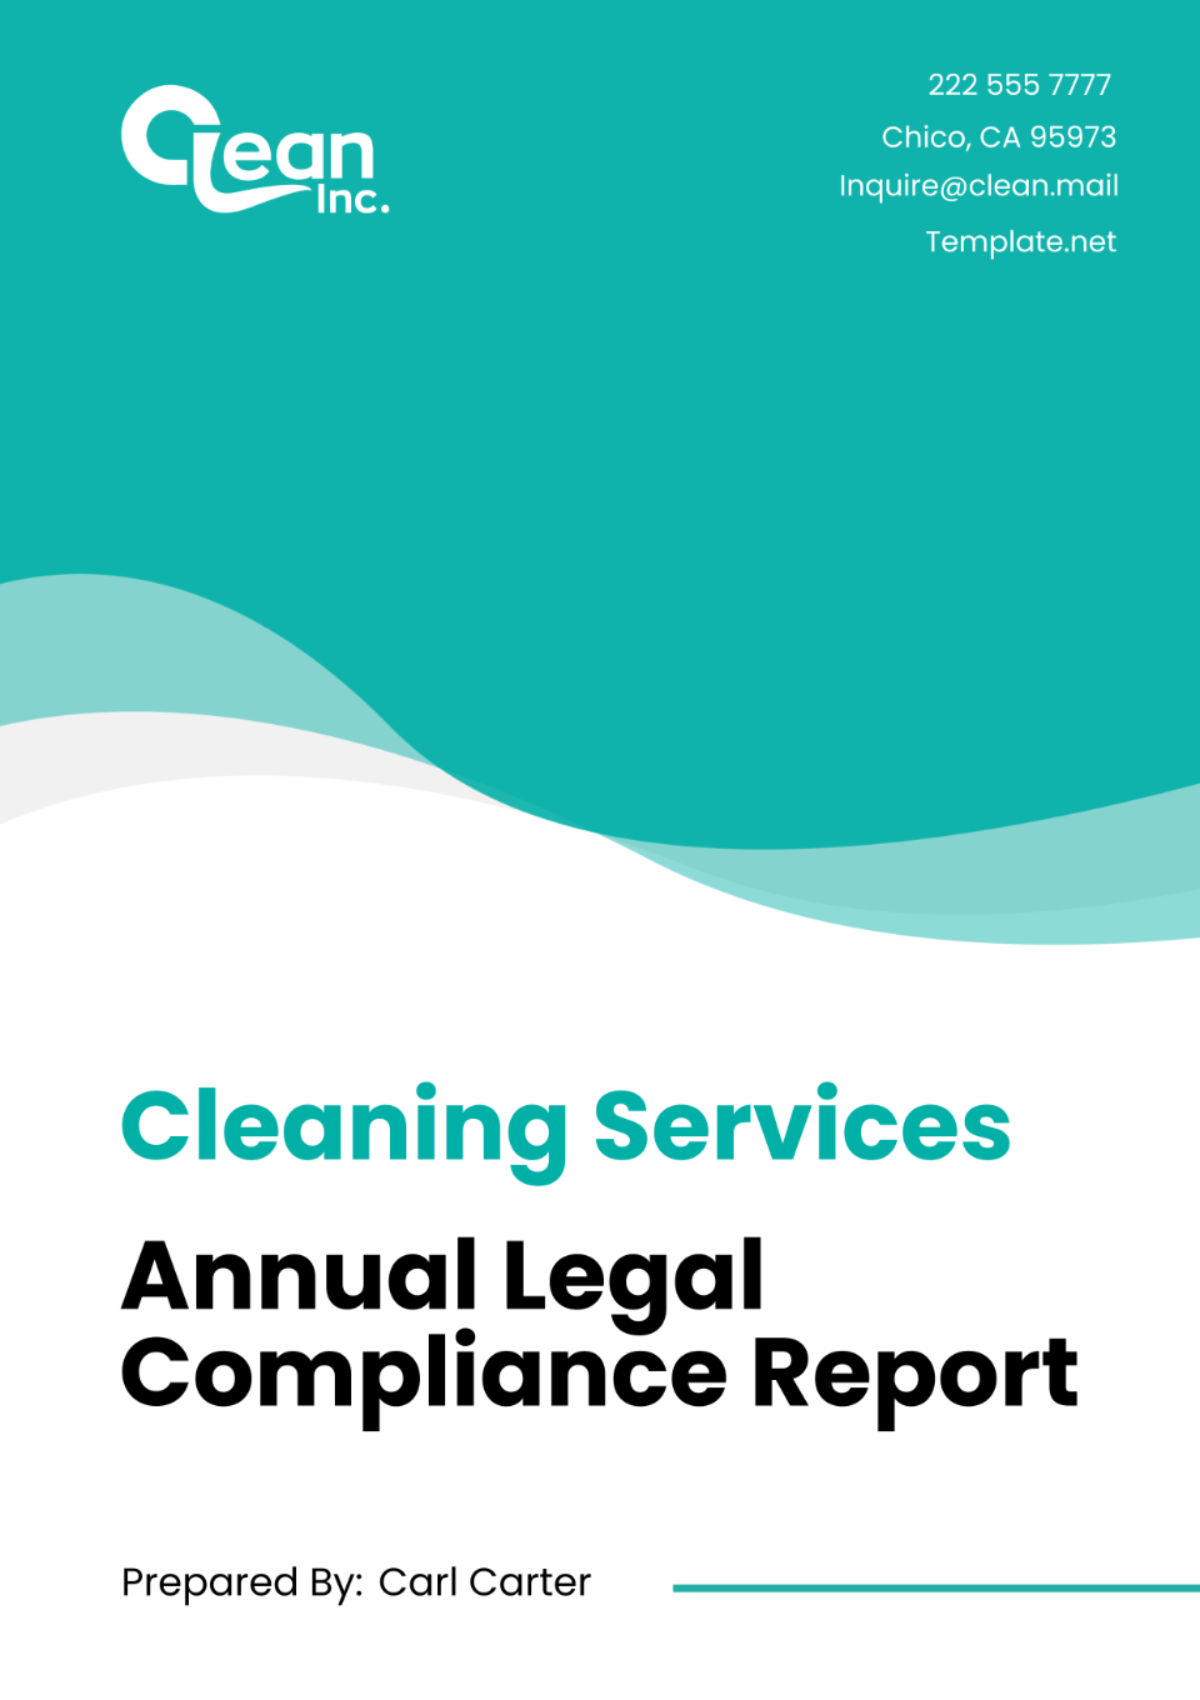 Cleaning Services Annual Legal Compliance Report Template